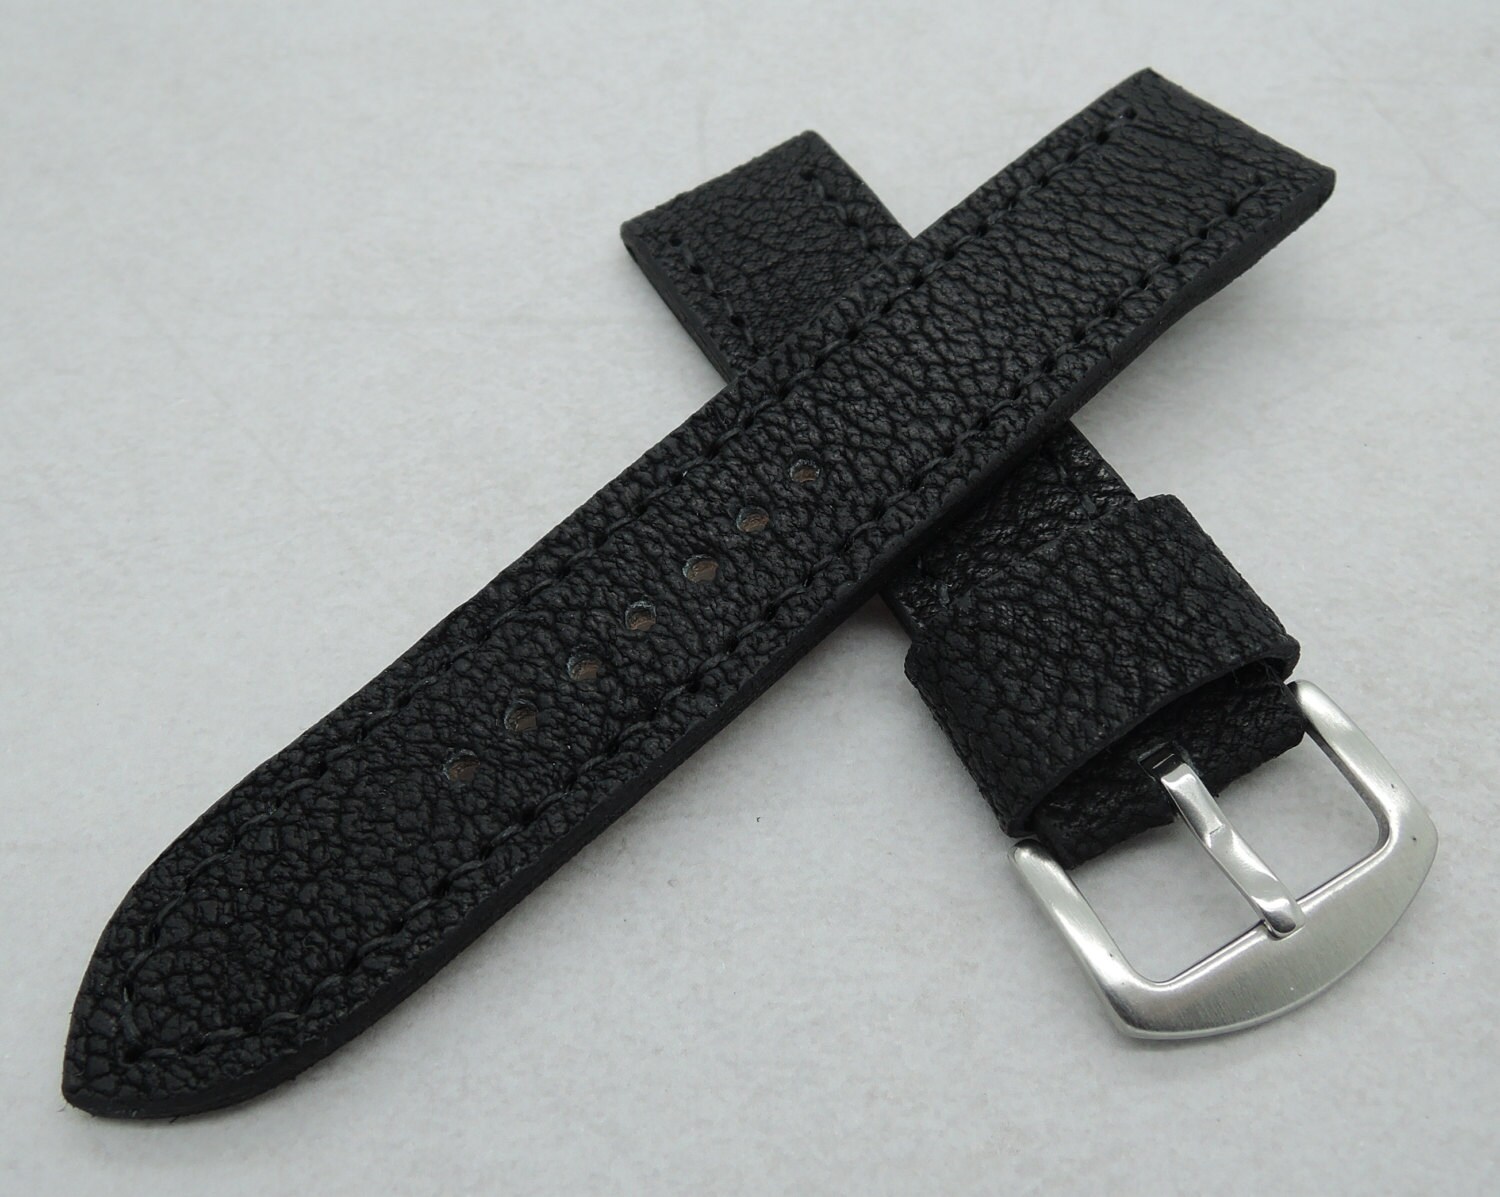 22mm watch strap made from black shark with cowhide lining